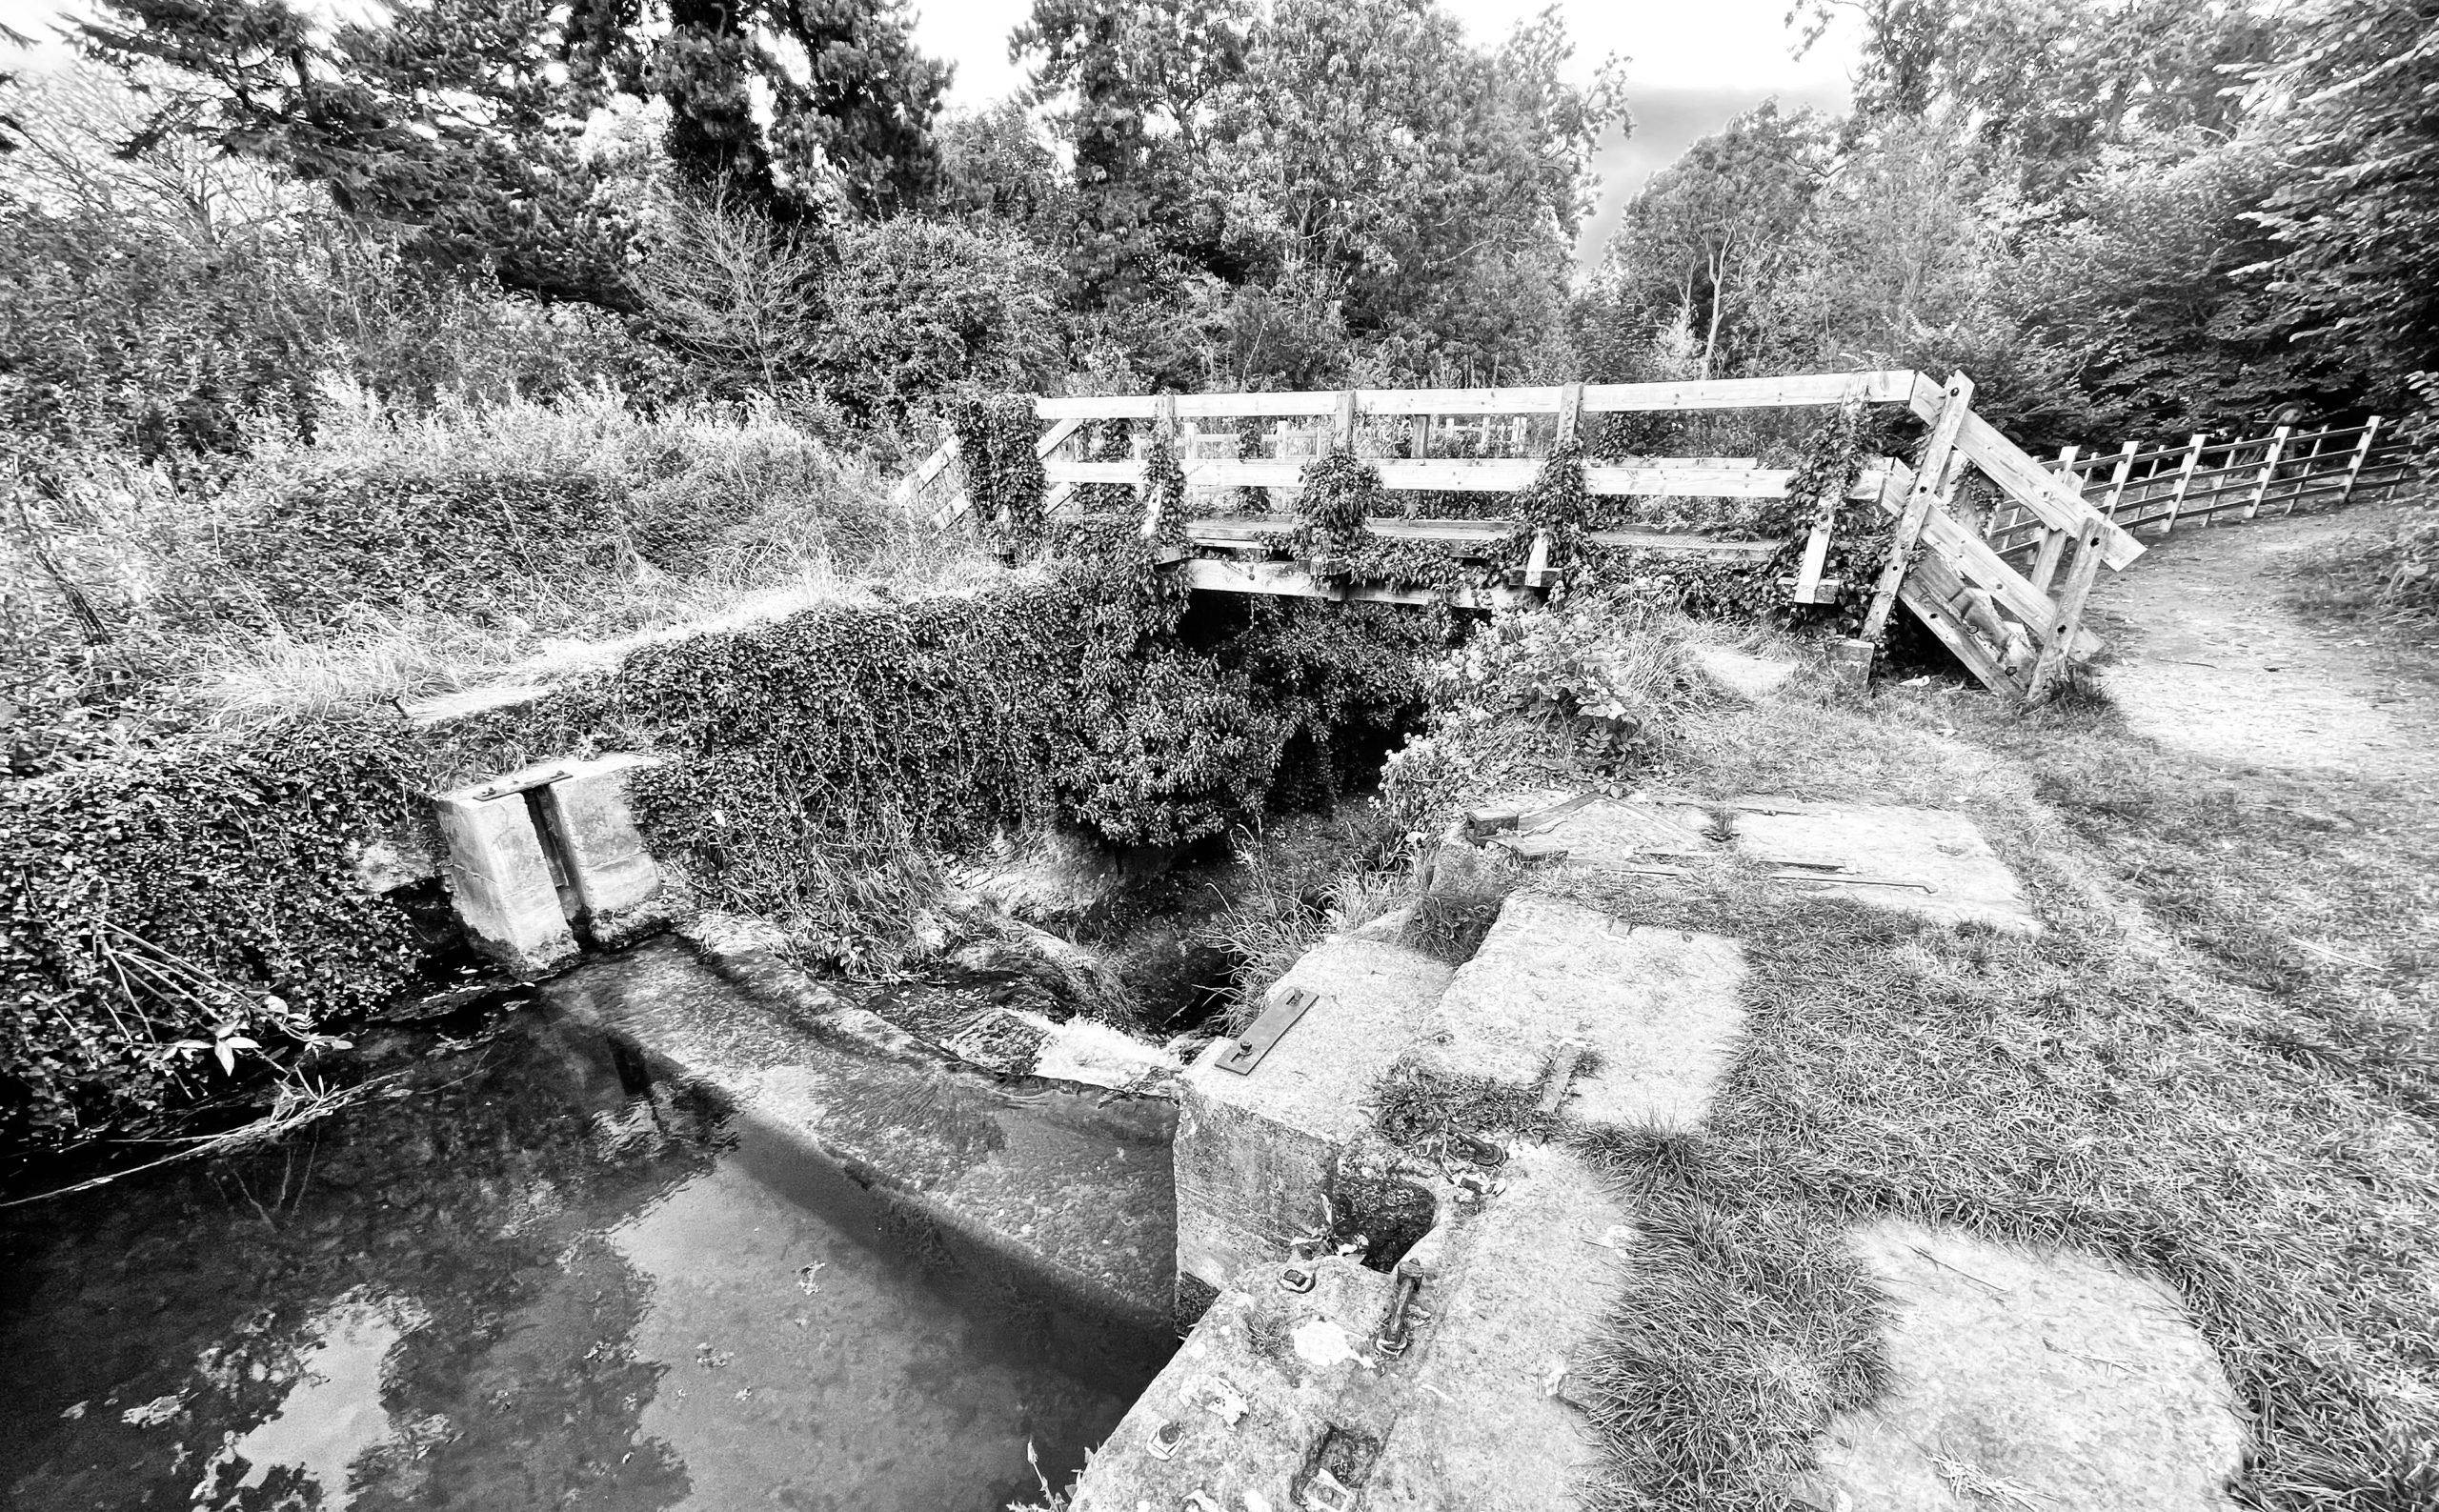 Weir and lock on the River Slea